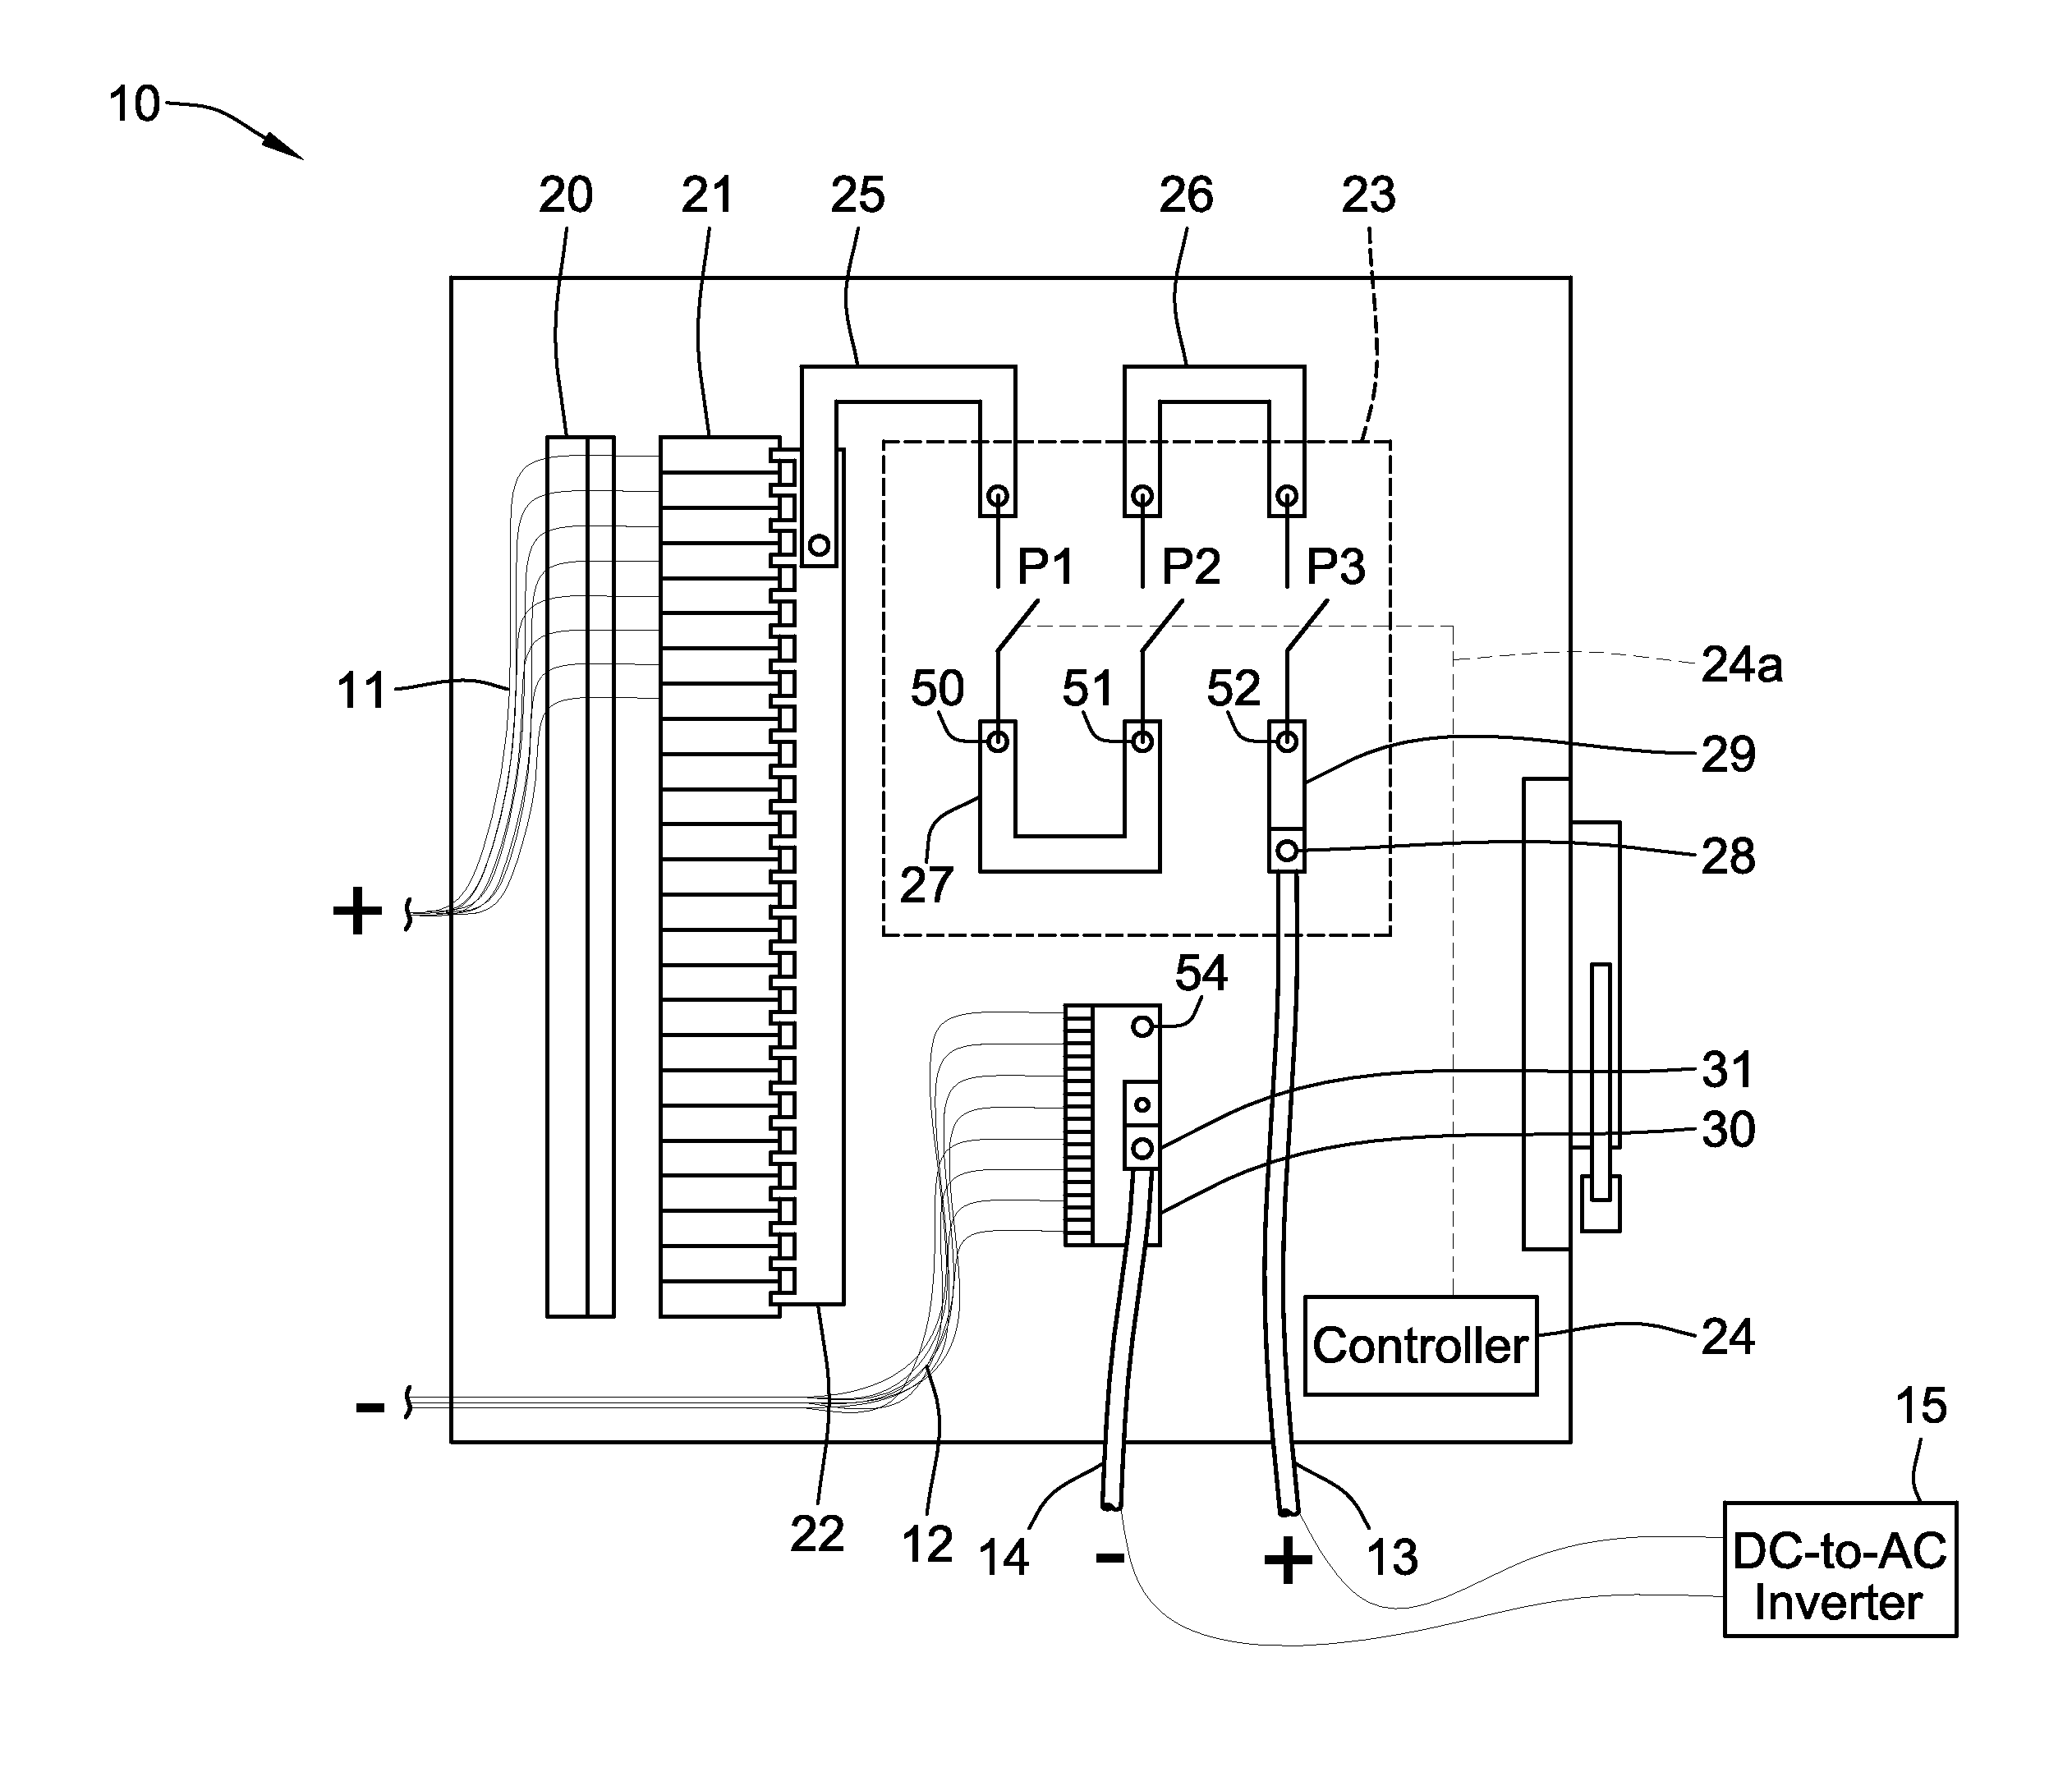 Photovoltaic string combiner with disconnect having provision for converting between grounded and ungrounded systems